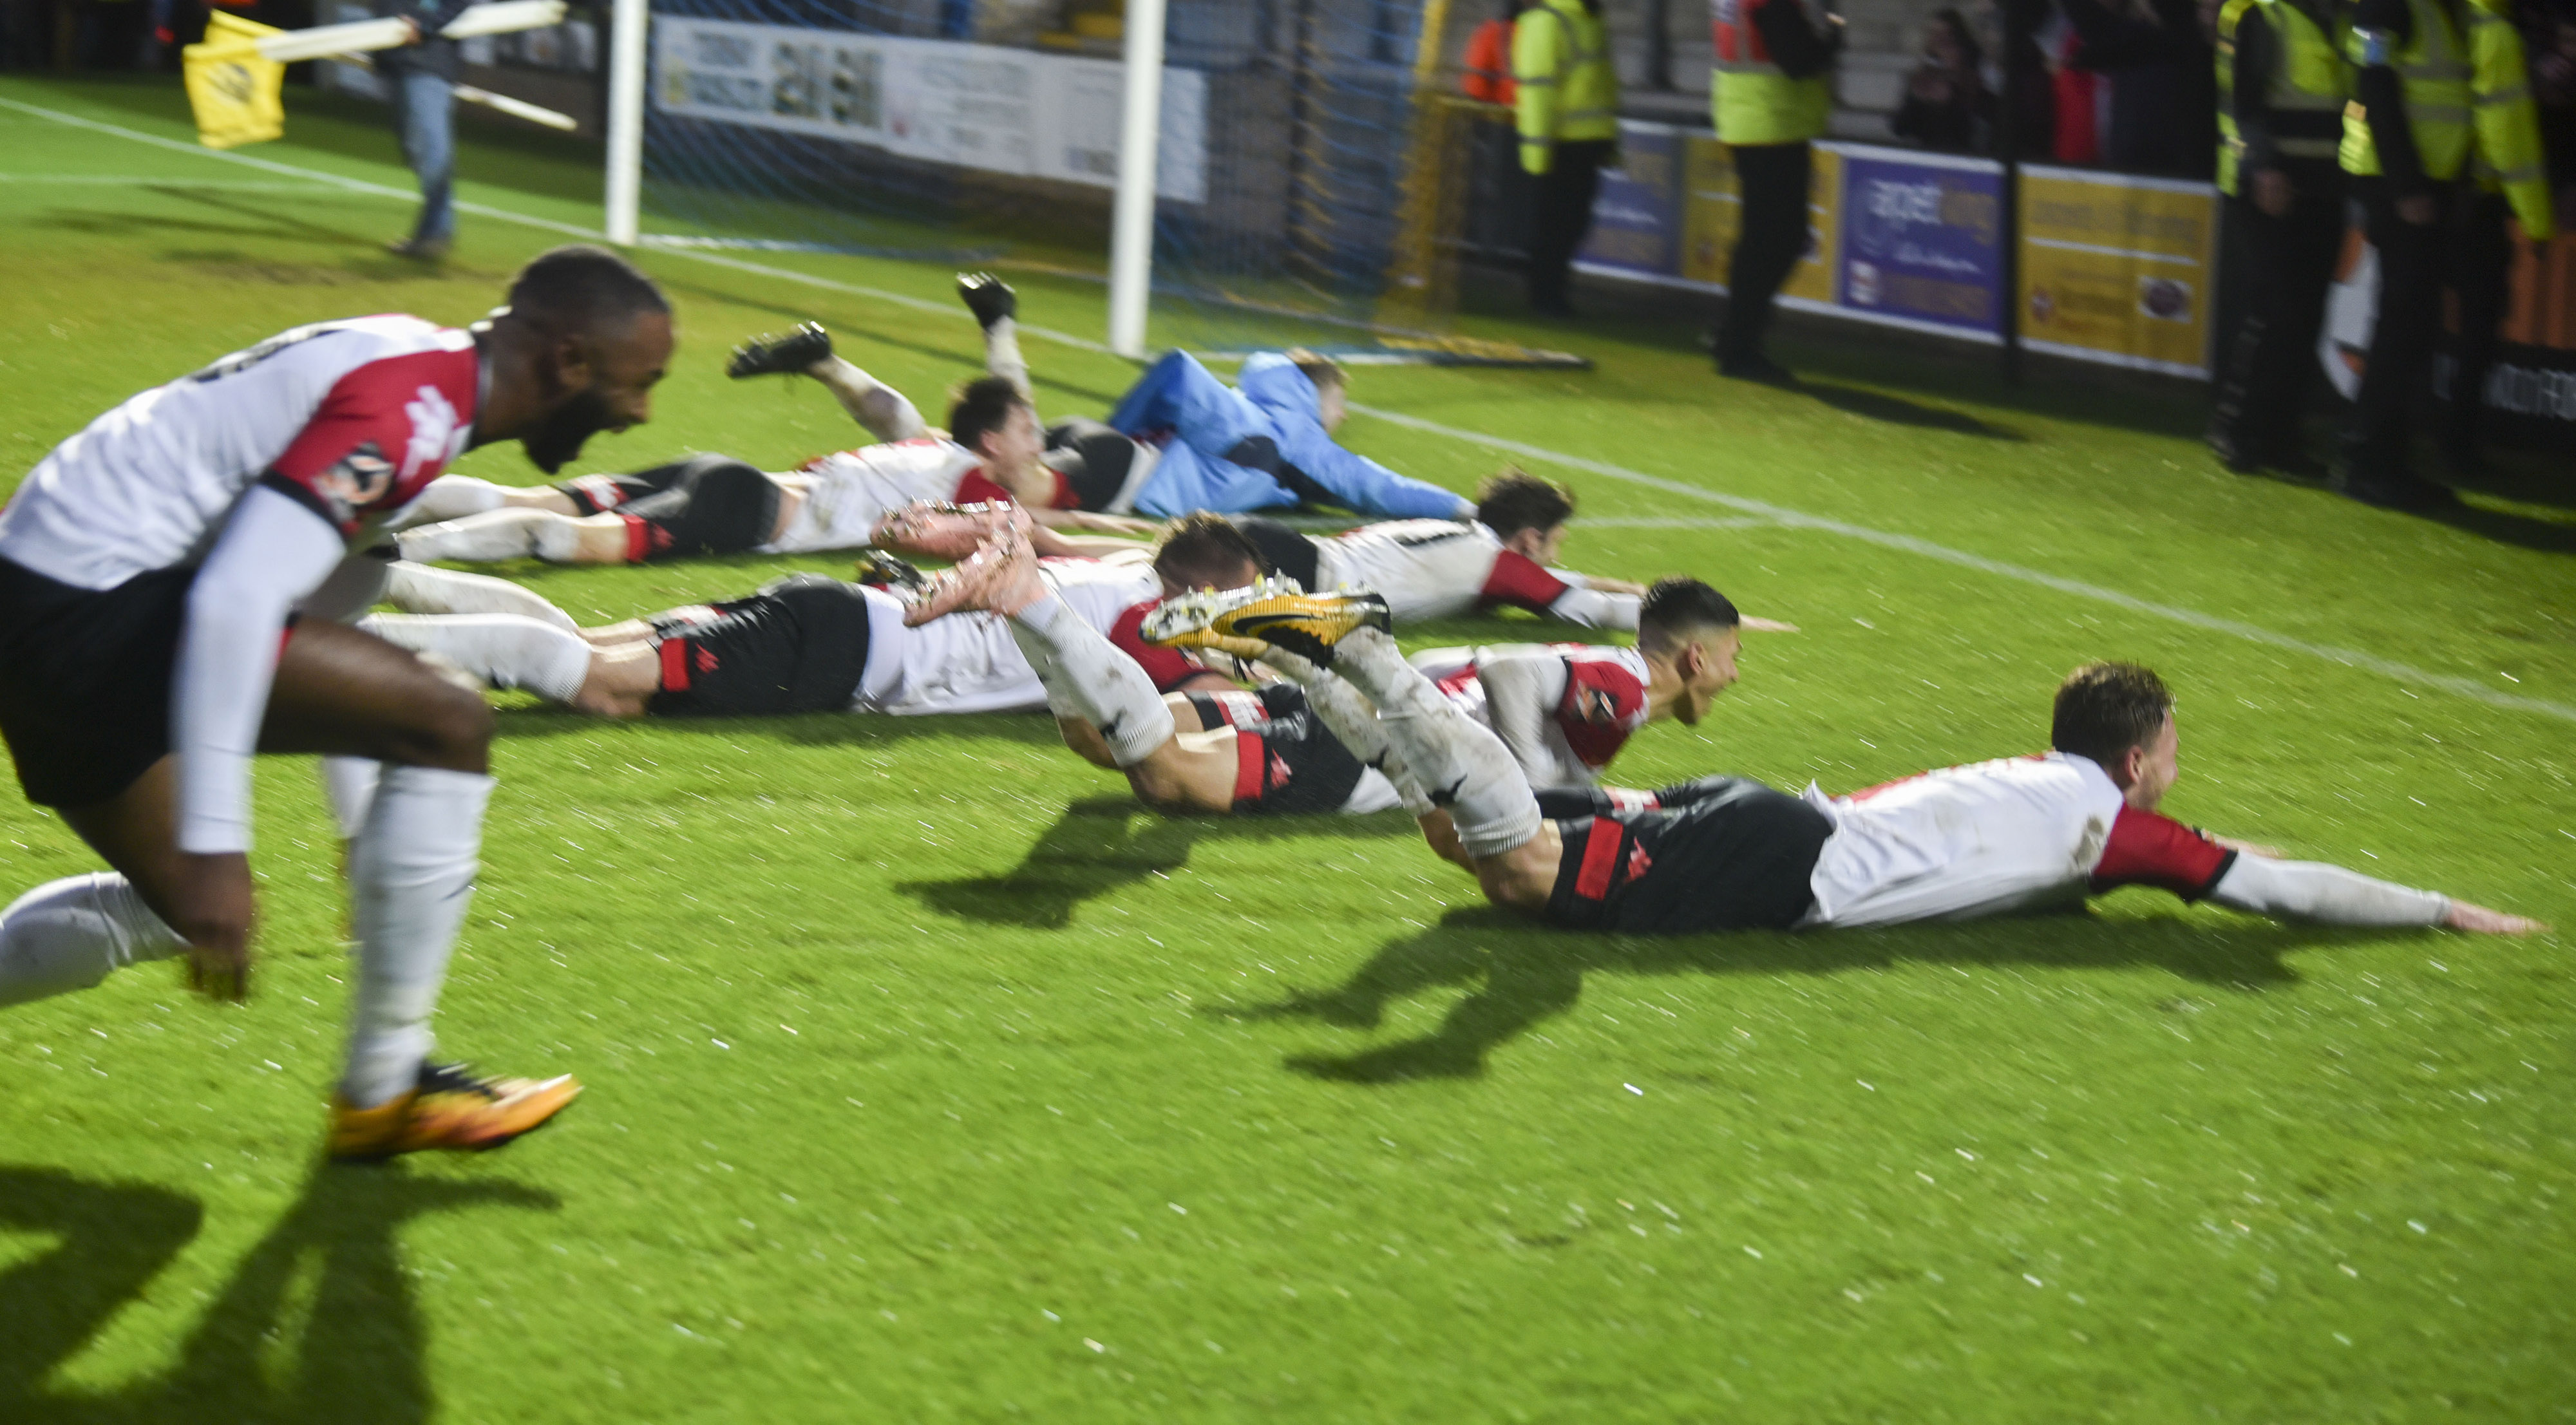 The celebrations after beating Torquay in the first round